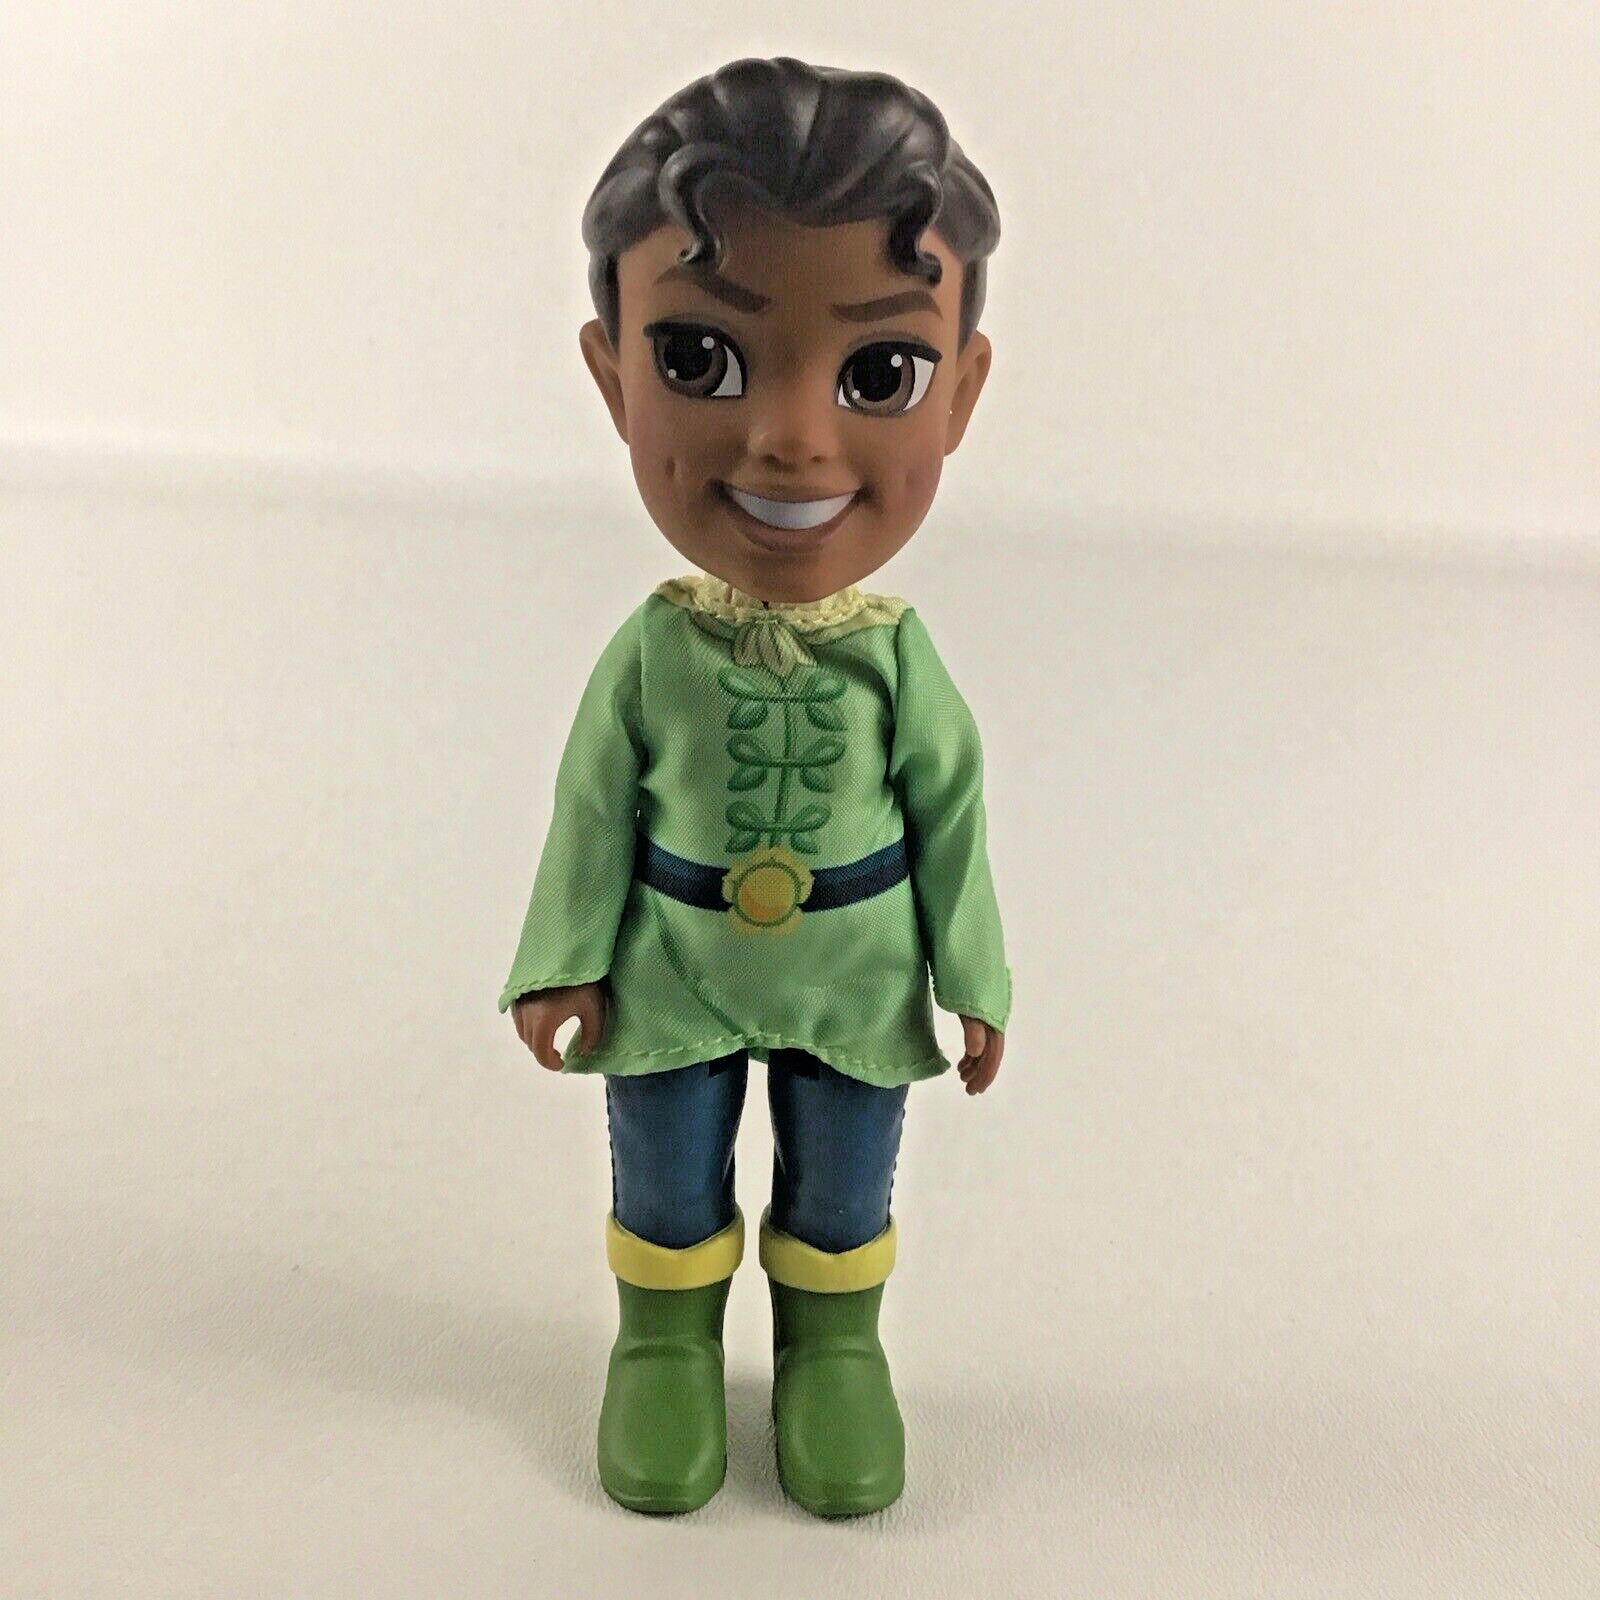 Disney Princess & The Frog Petite 6” Doll Prince Naveen Moments Of Love Figure - $34.60